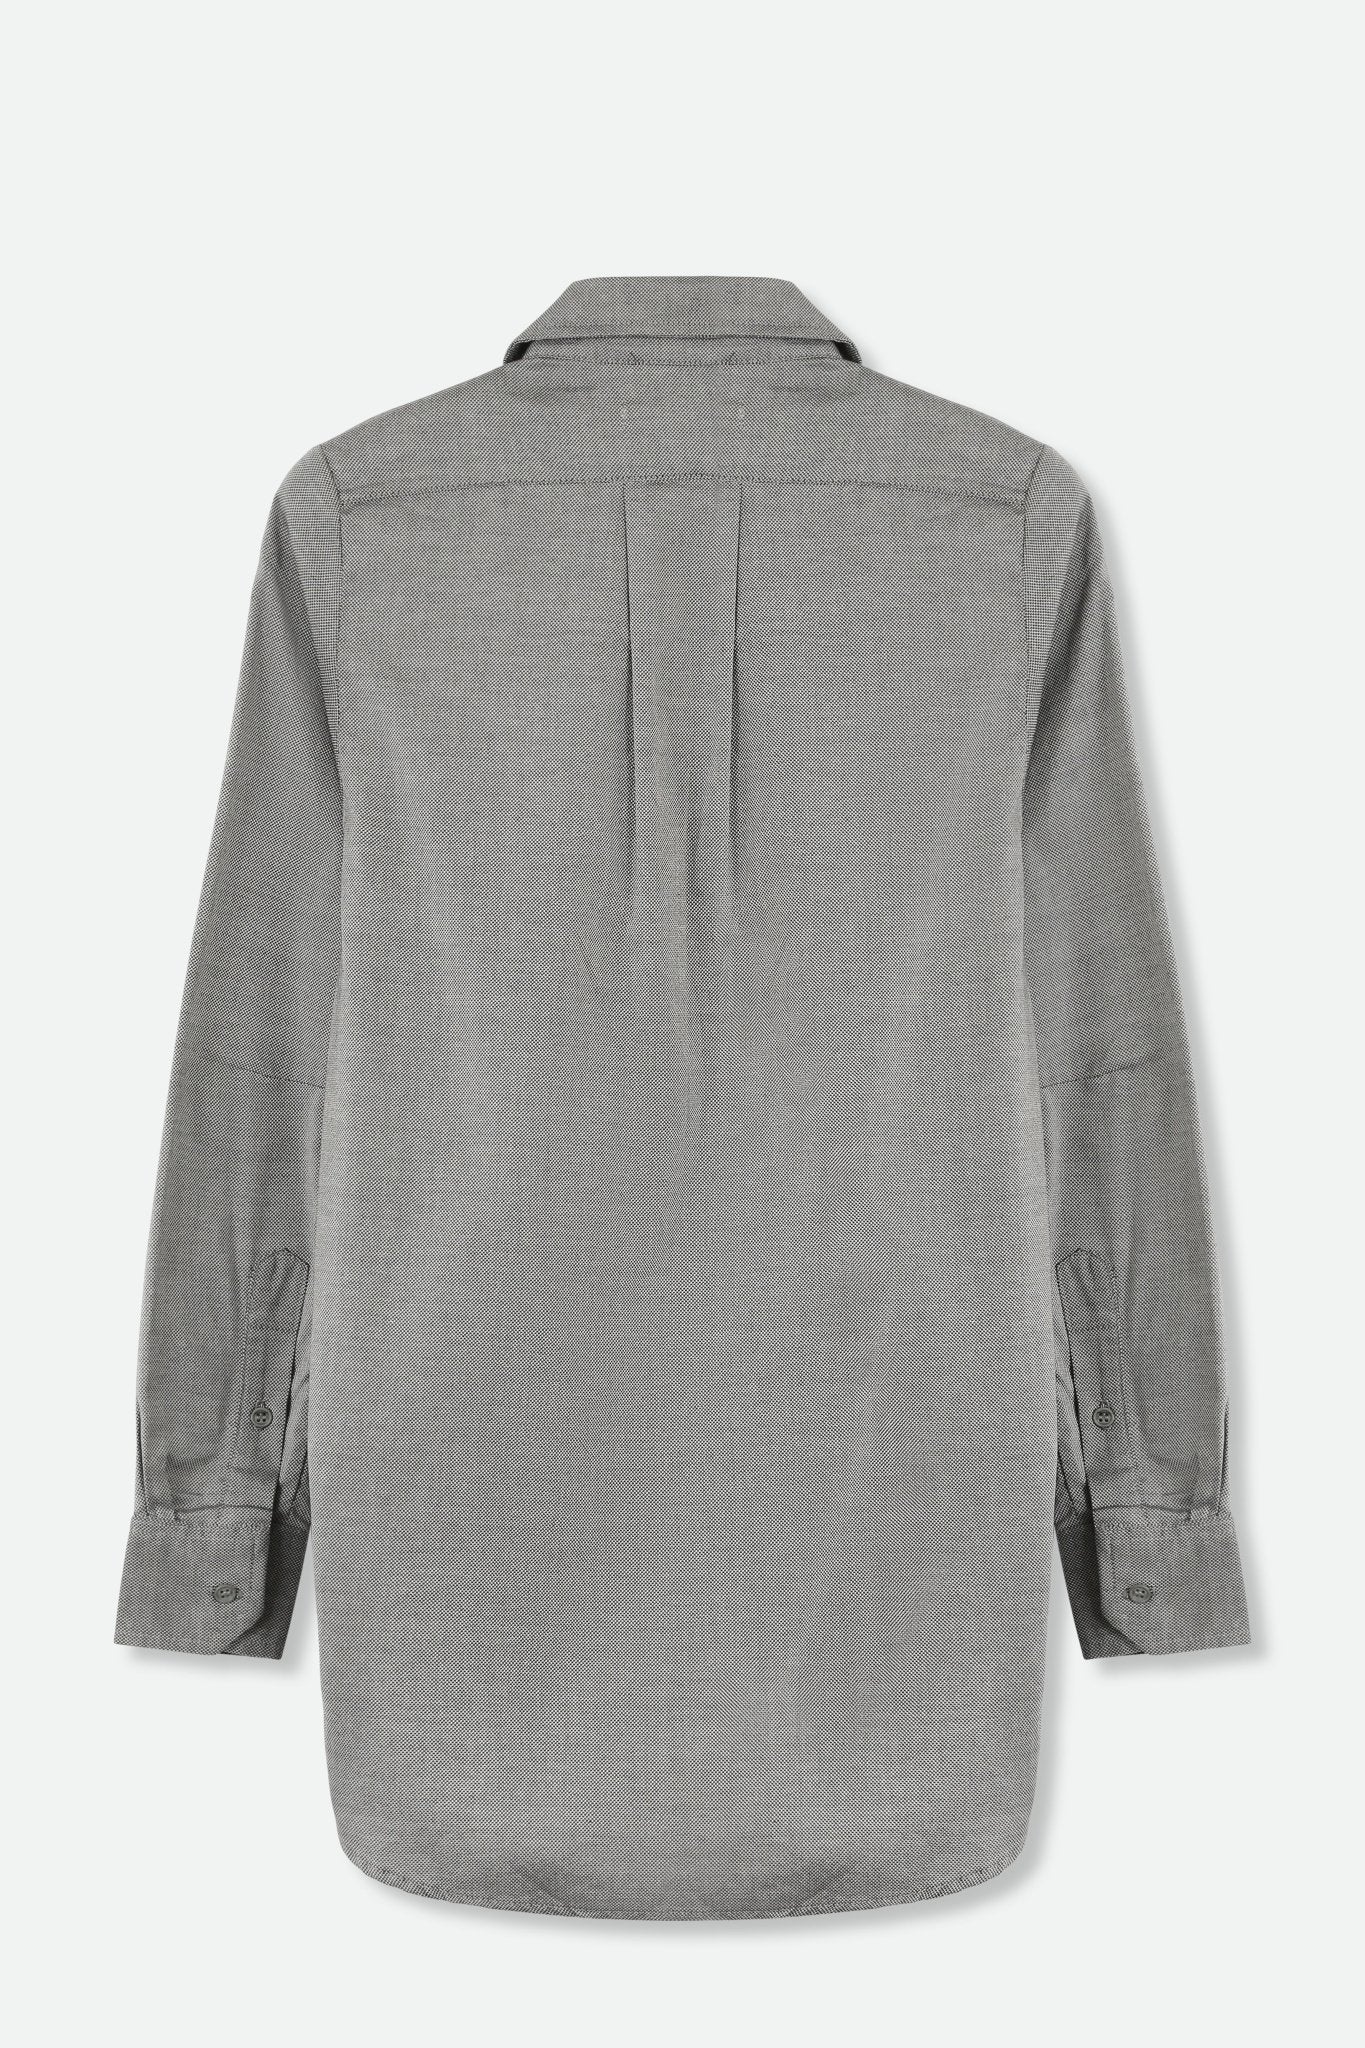 TRIESTE ROUNDED COLLARED SHIRT IN COTTON - Jarbo